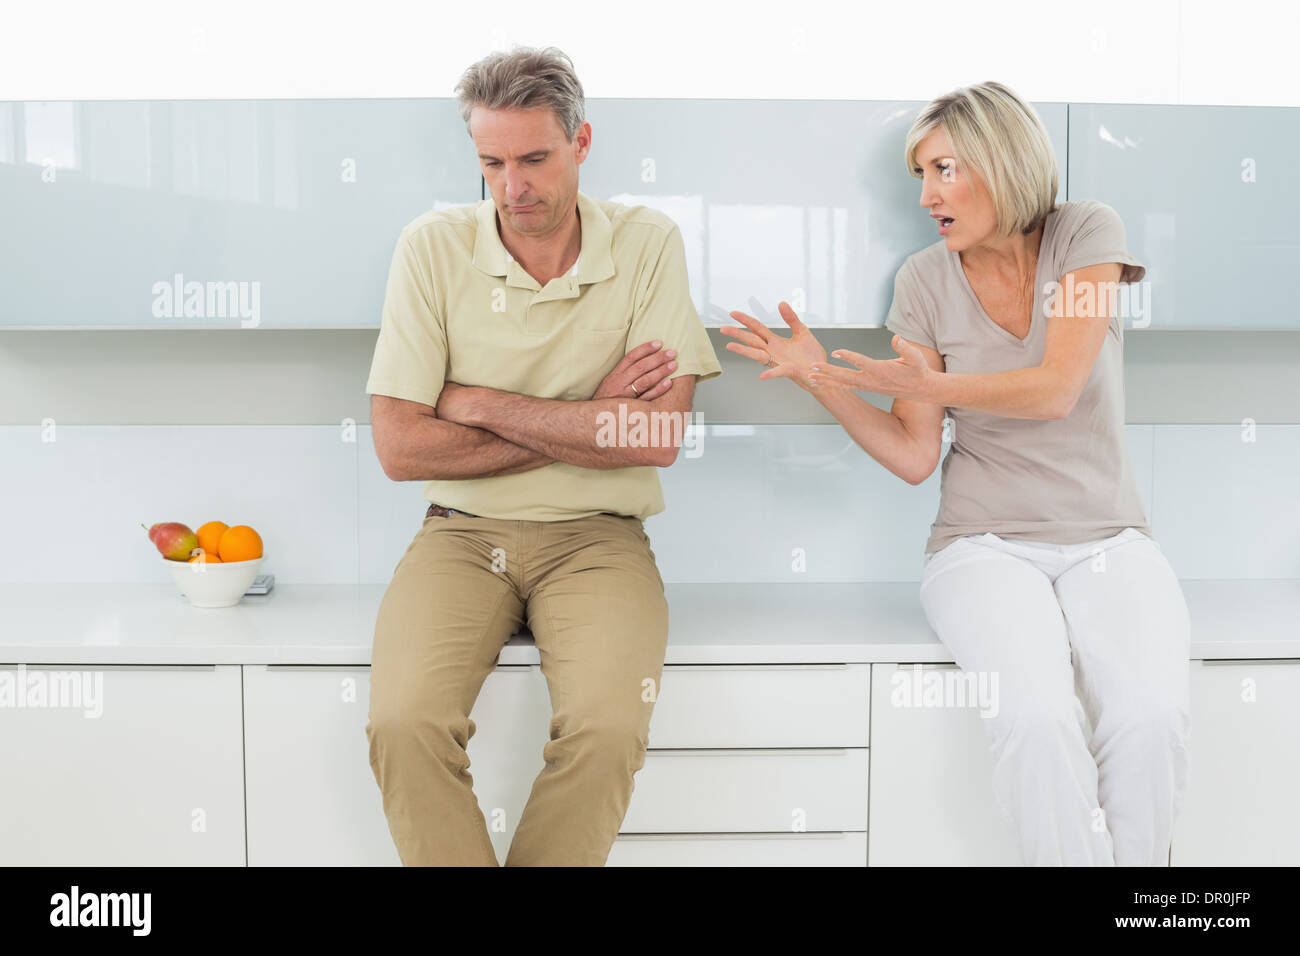 Man with arms crossed as woman argue in kitchen Stock Photo